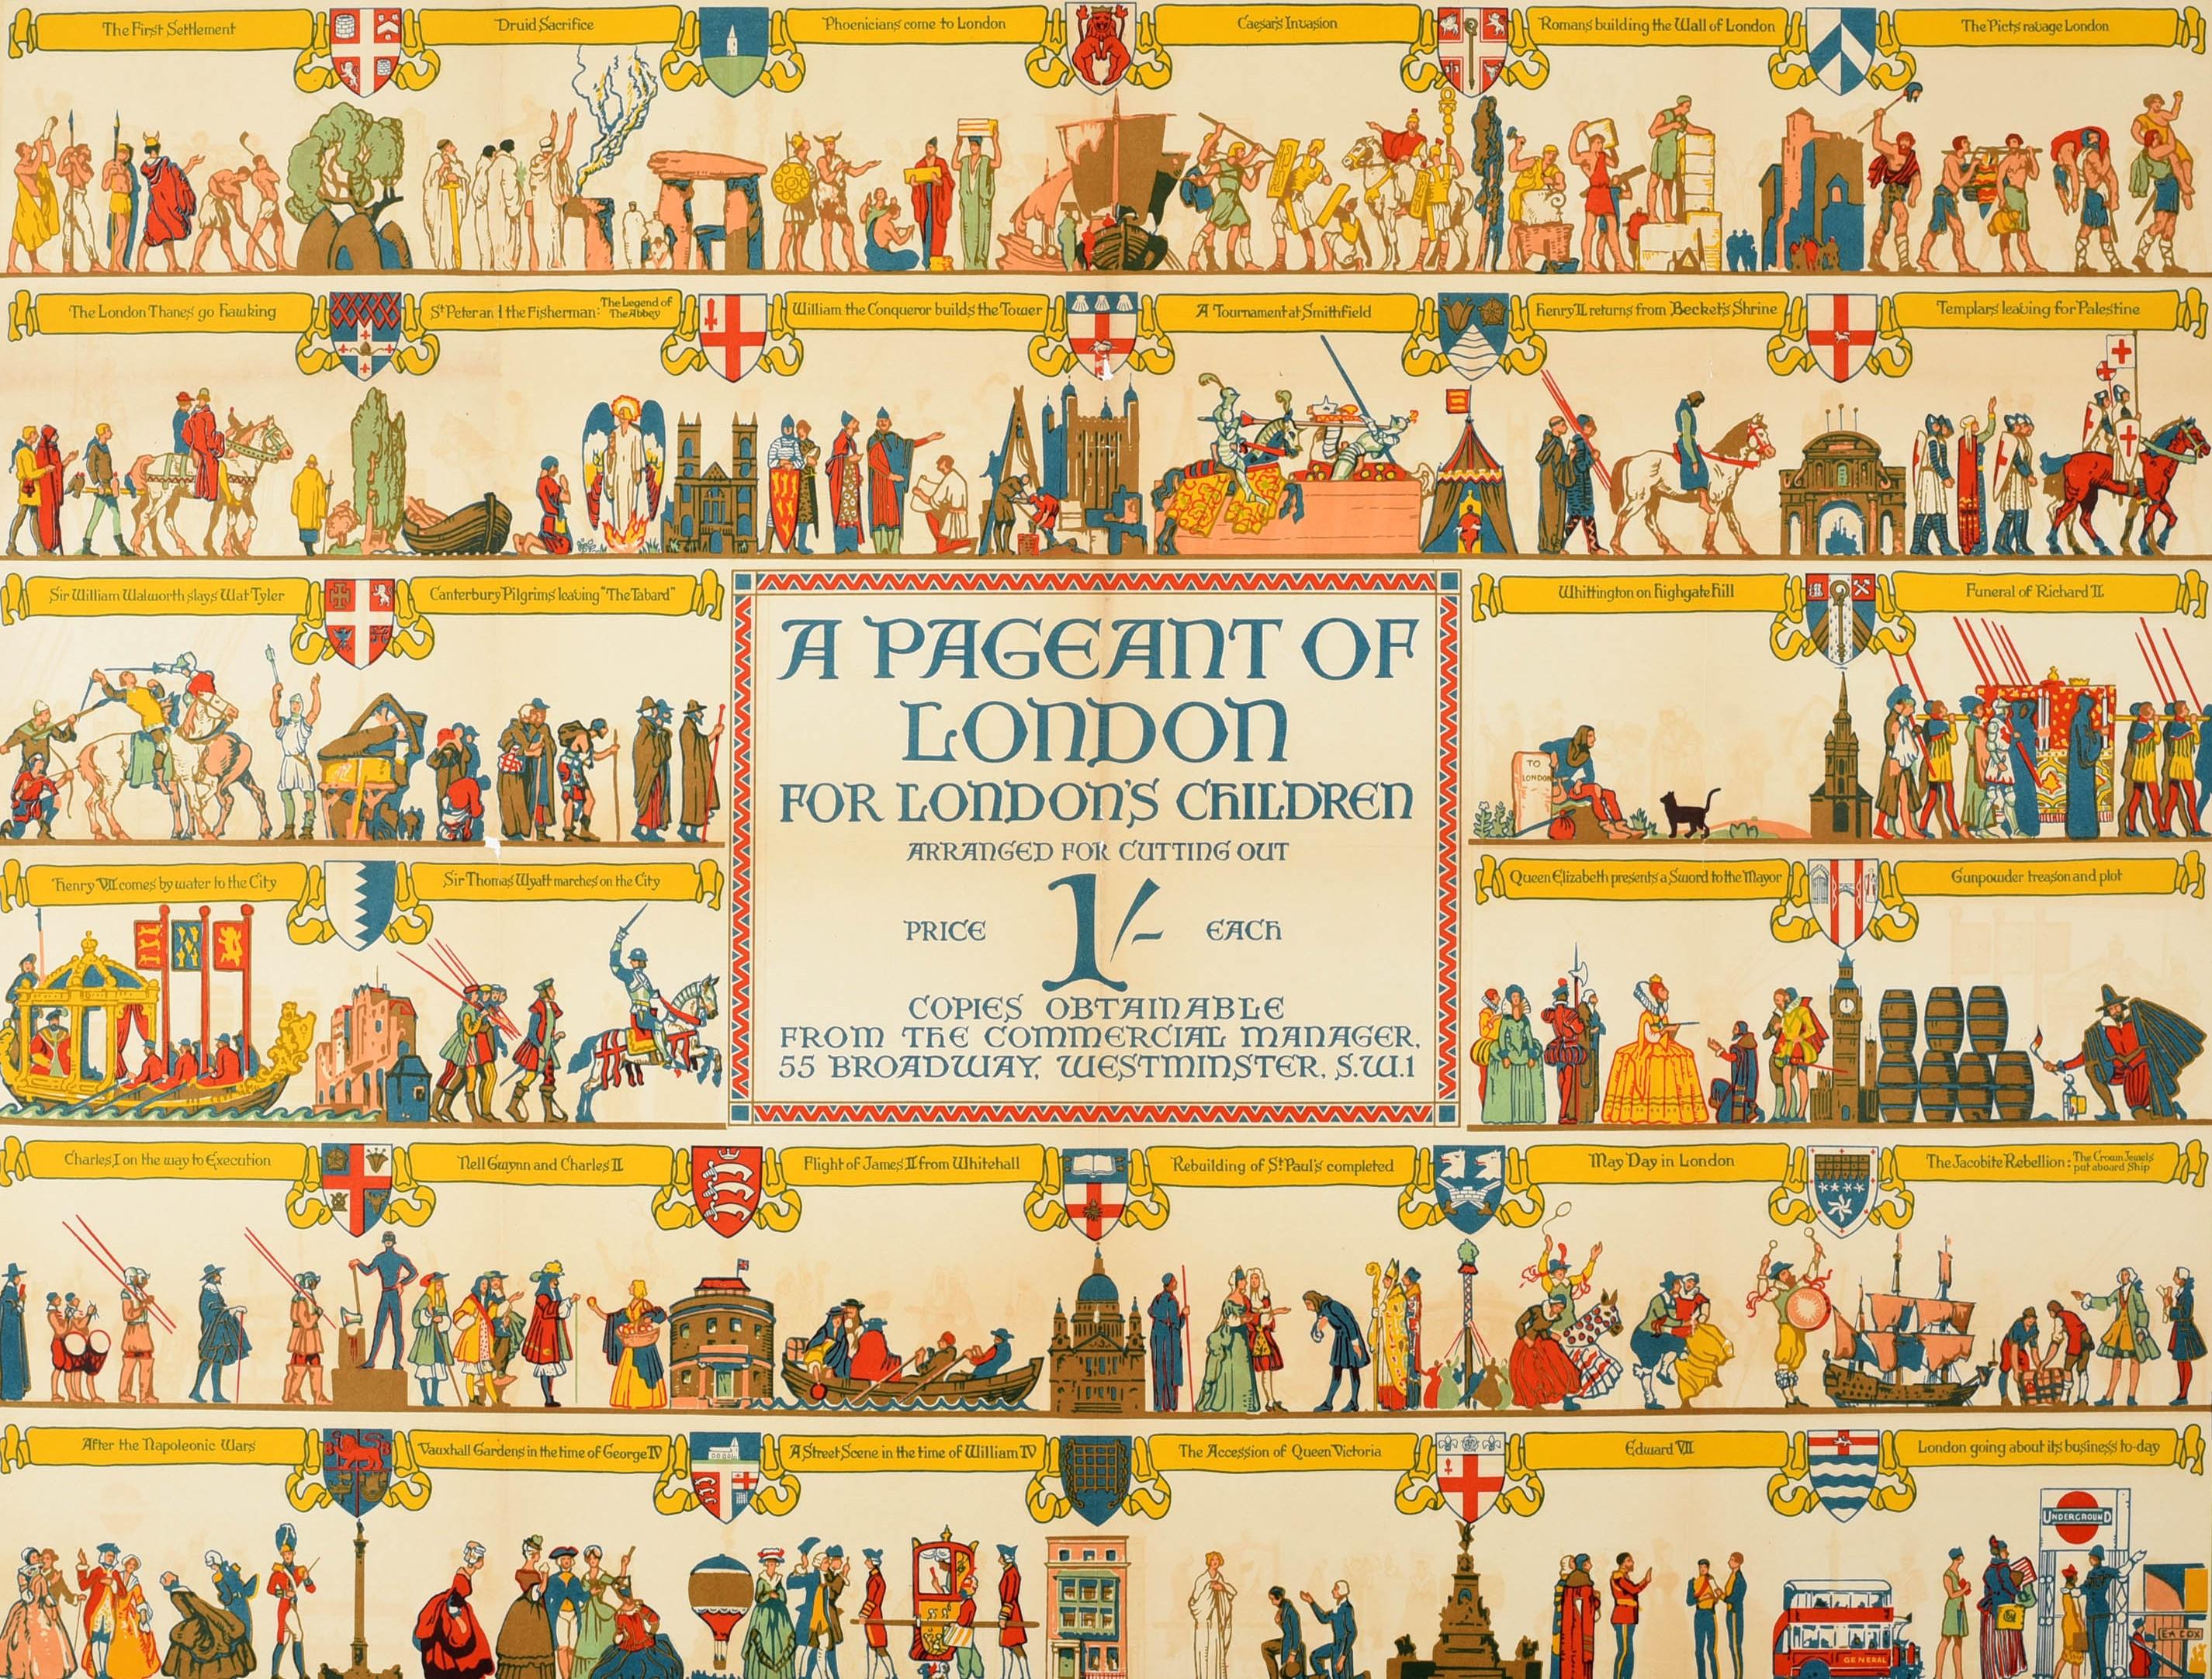 Original vintage London Transport travel advertising poster - A Pageant of London for London's Children arranged for cutting out - featuring colourful images covering the history of London from The First Settlement and a Druid Sacrifice through the